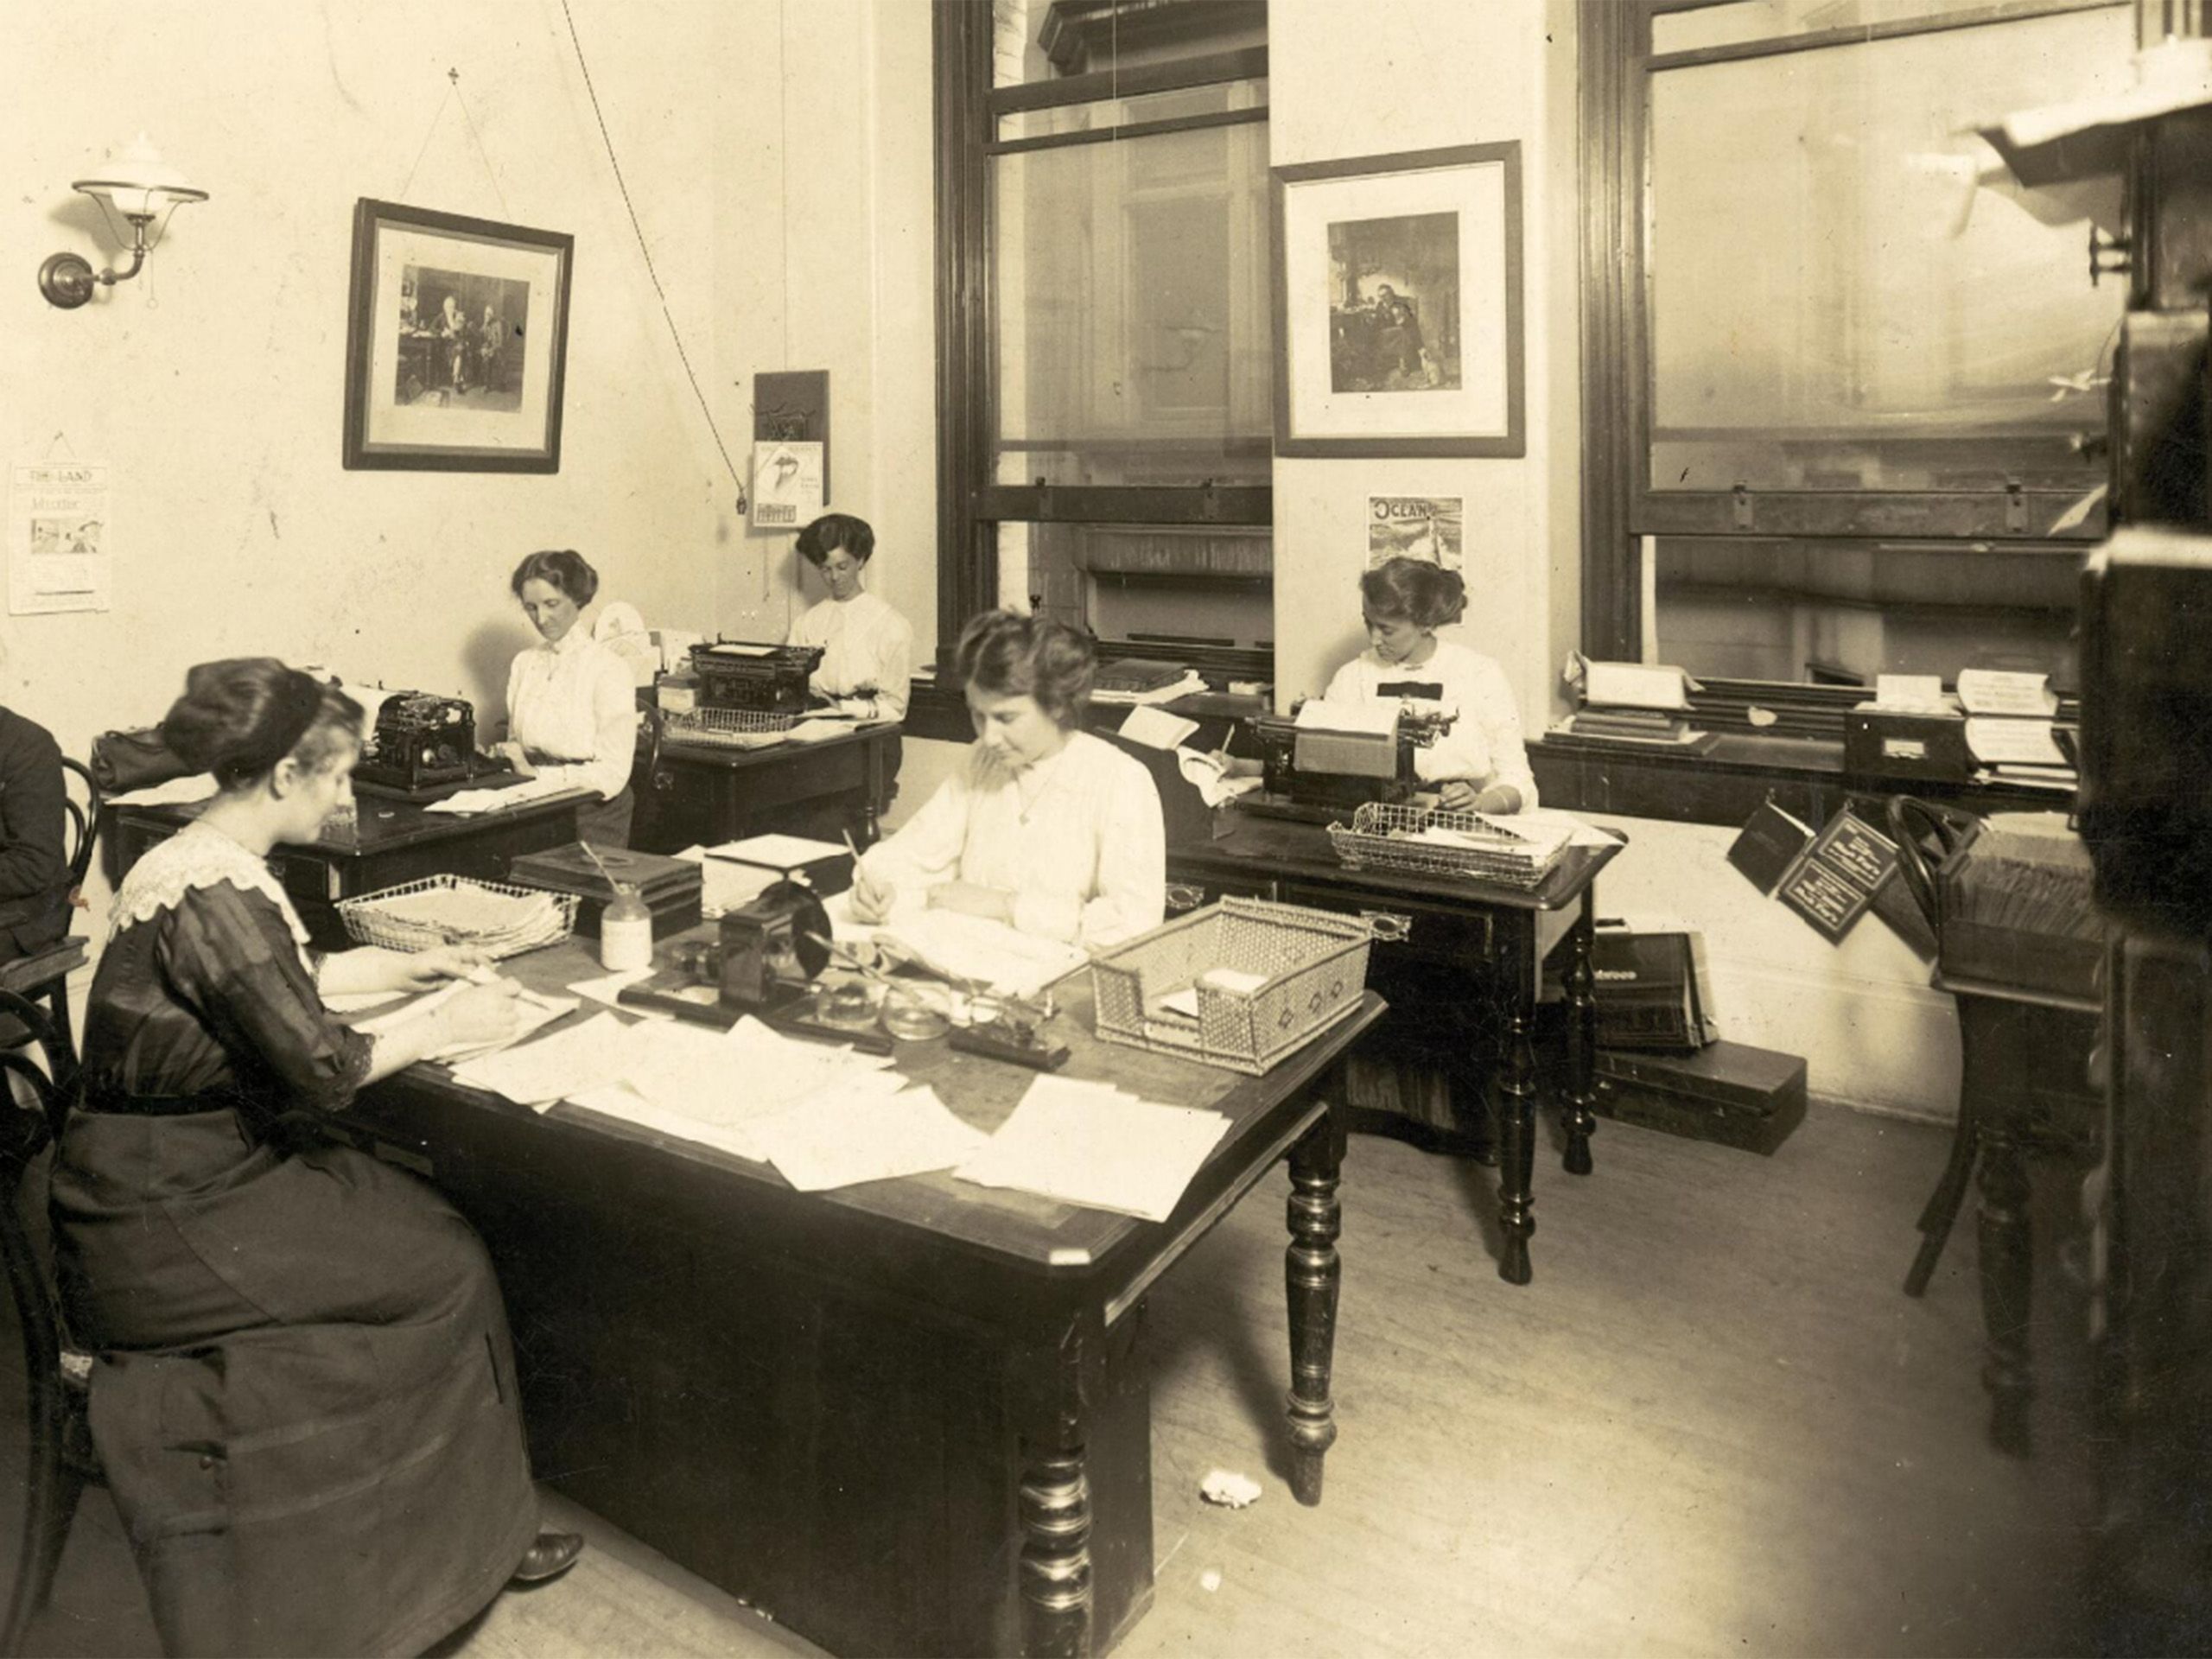 Employees sitting at desks in a room, with papers and typewriters.